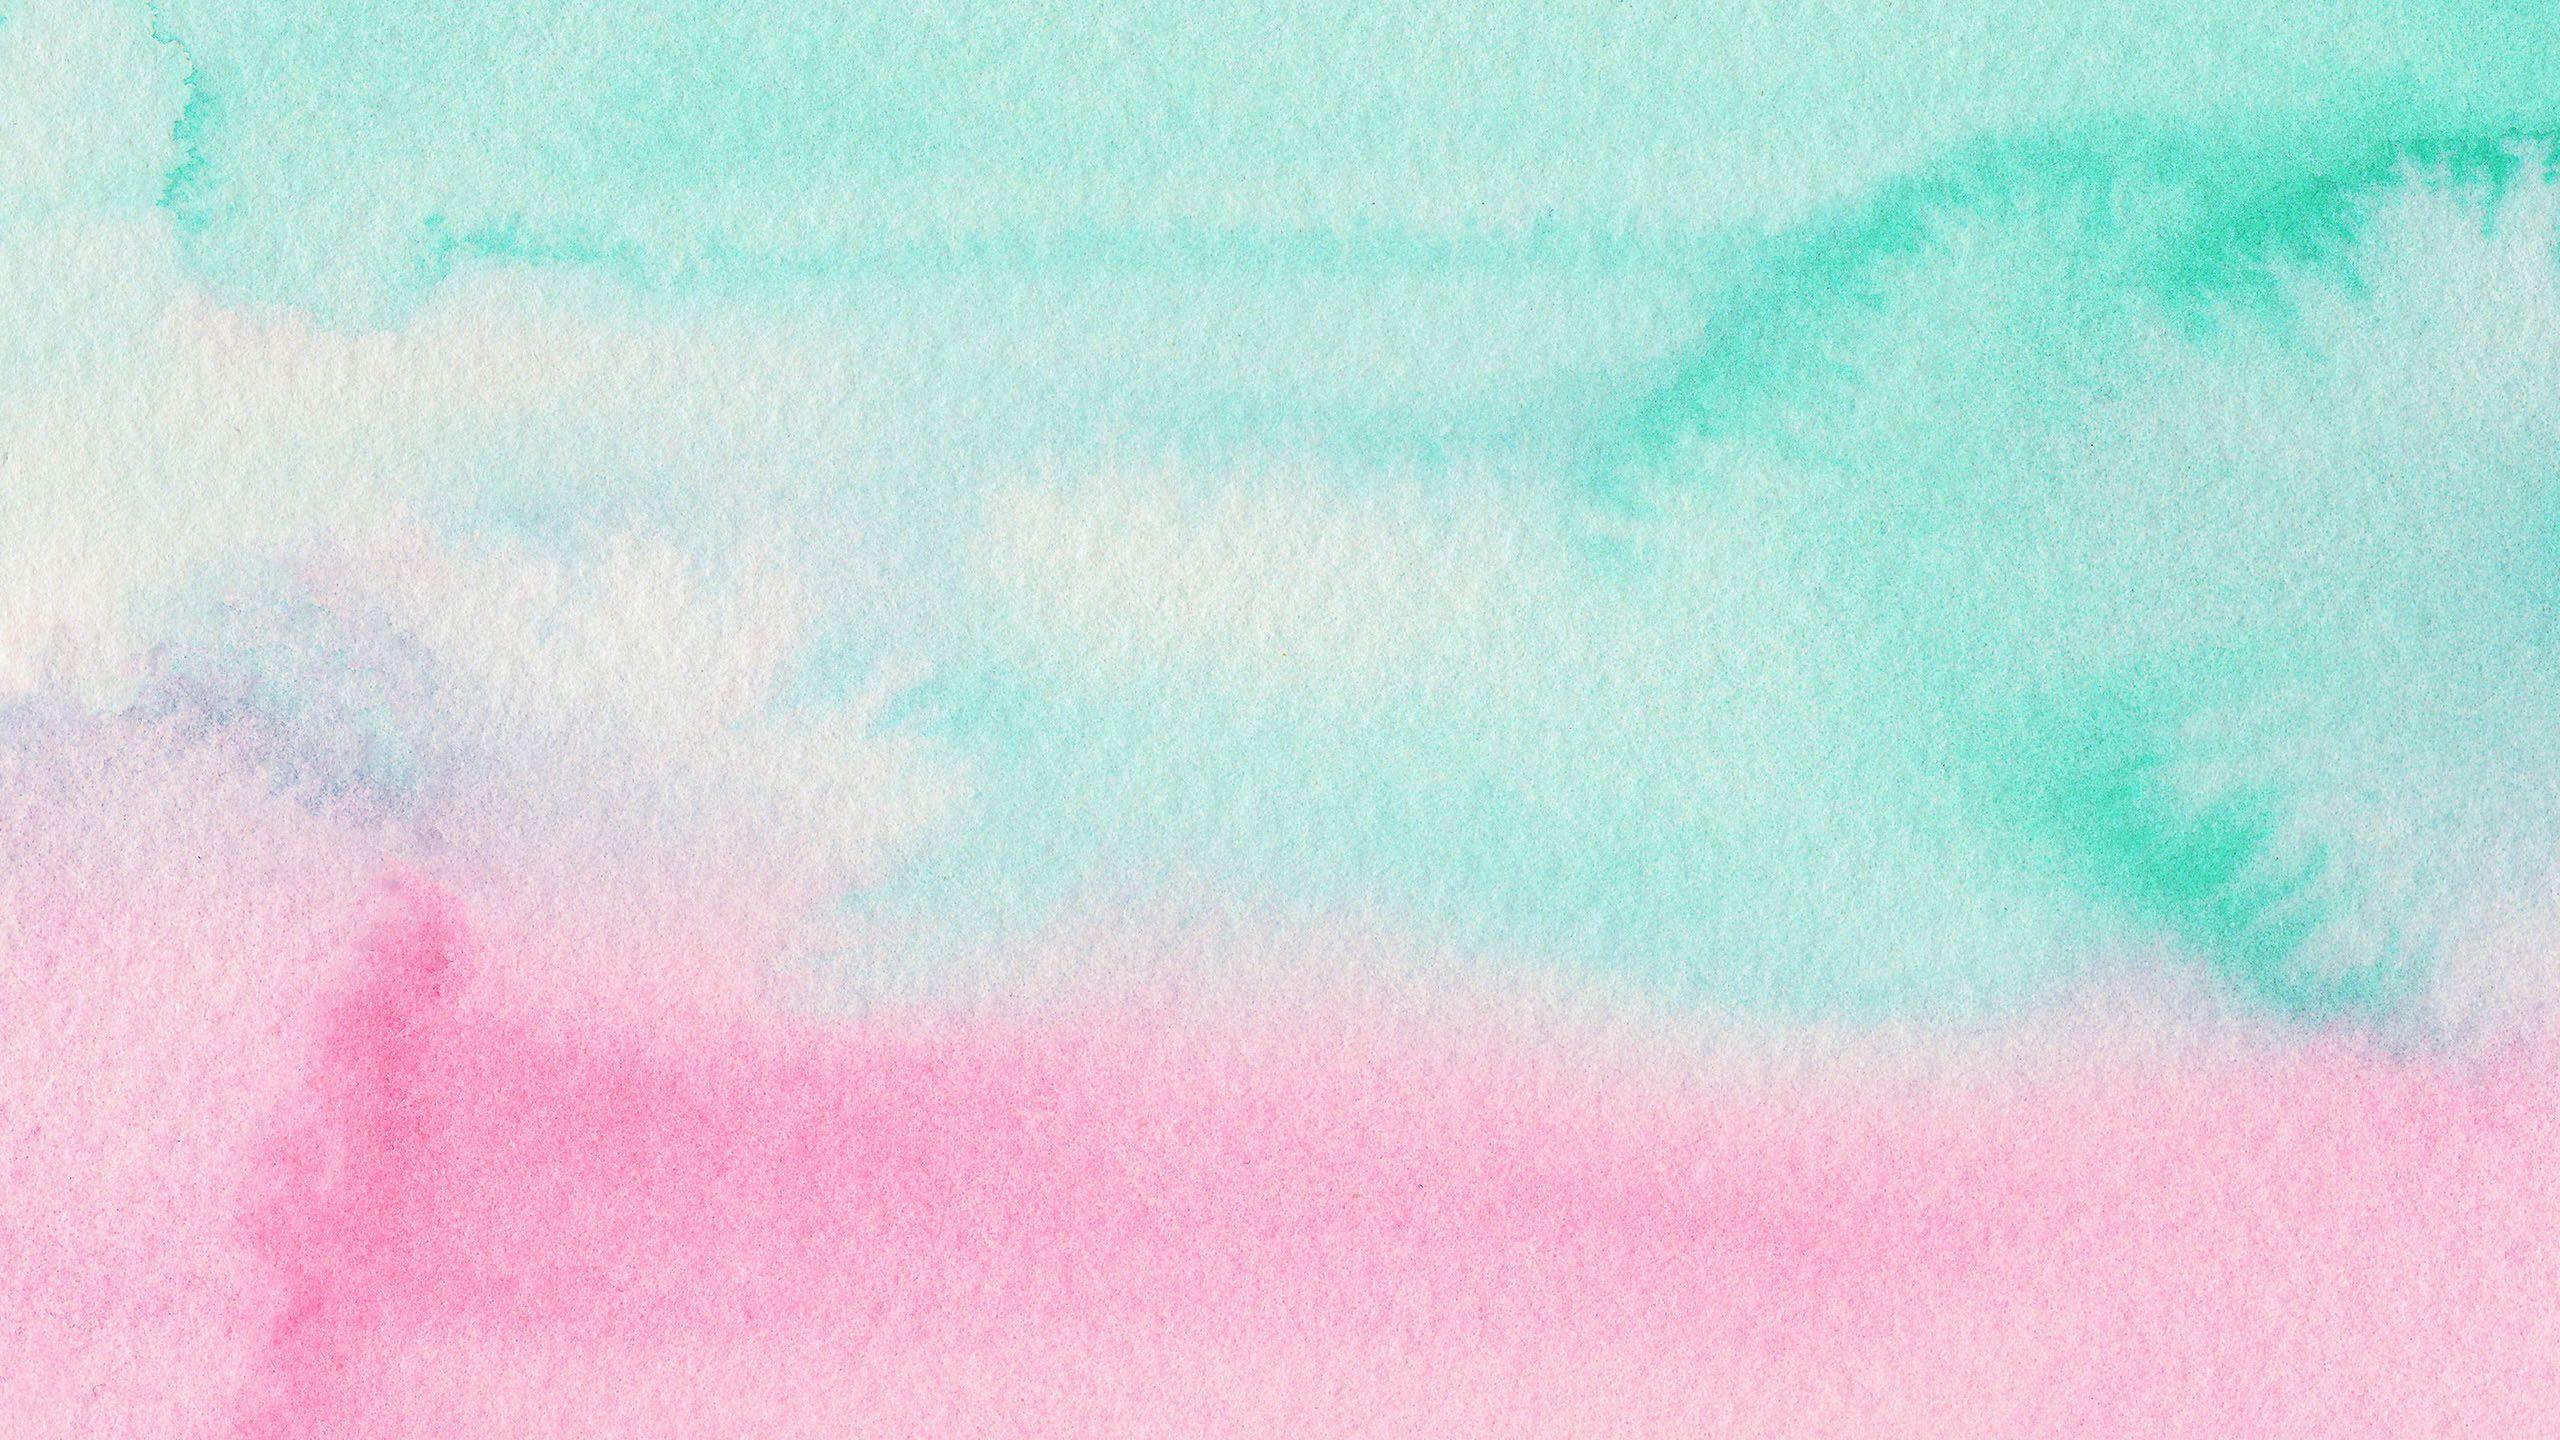 Pink And Teal Wallpapers